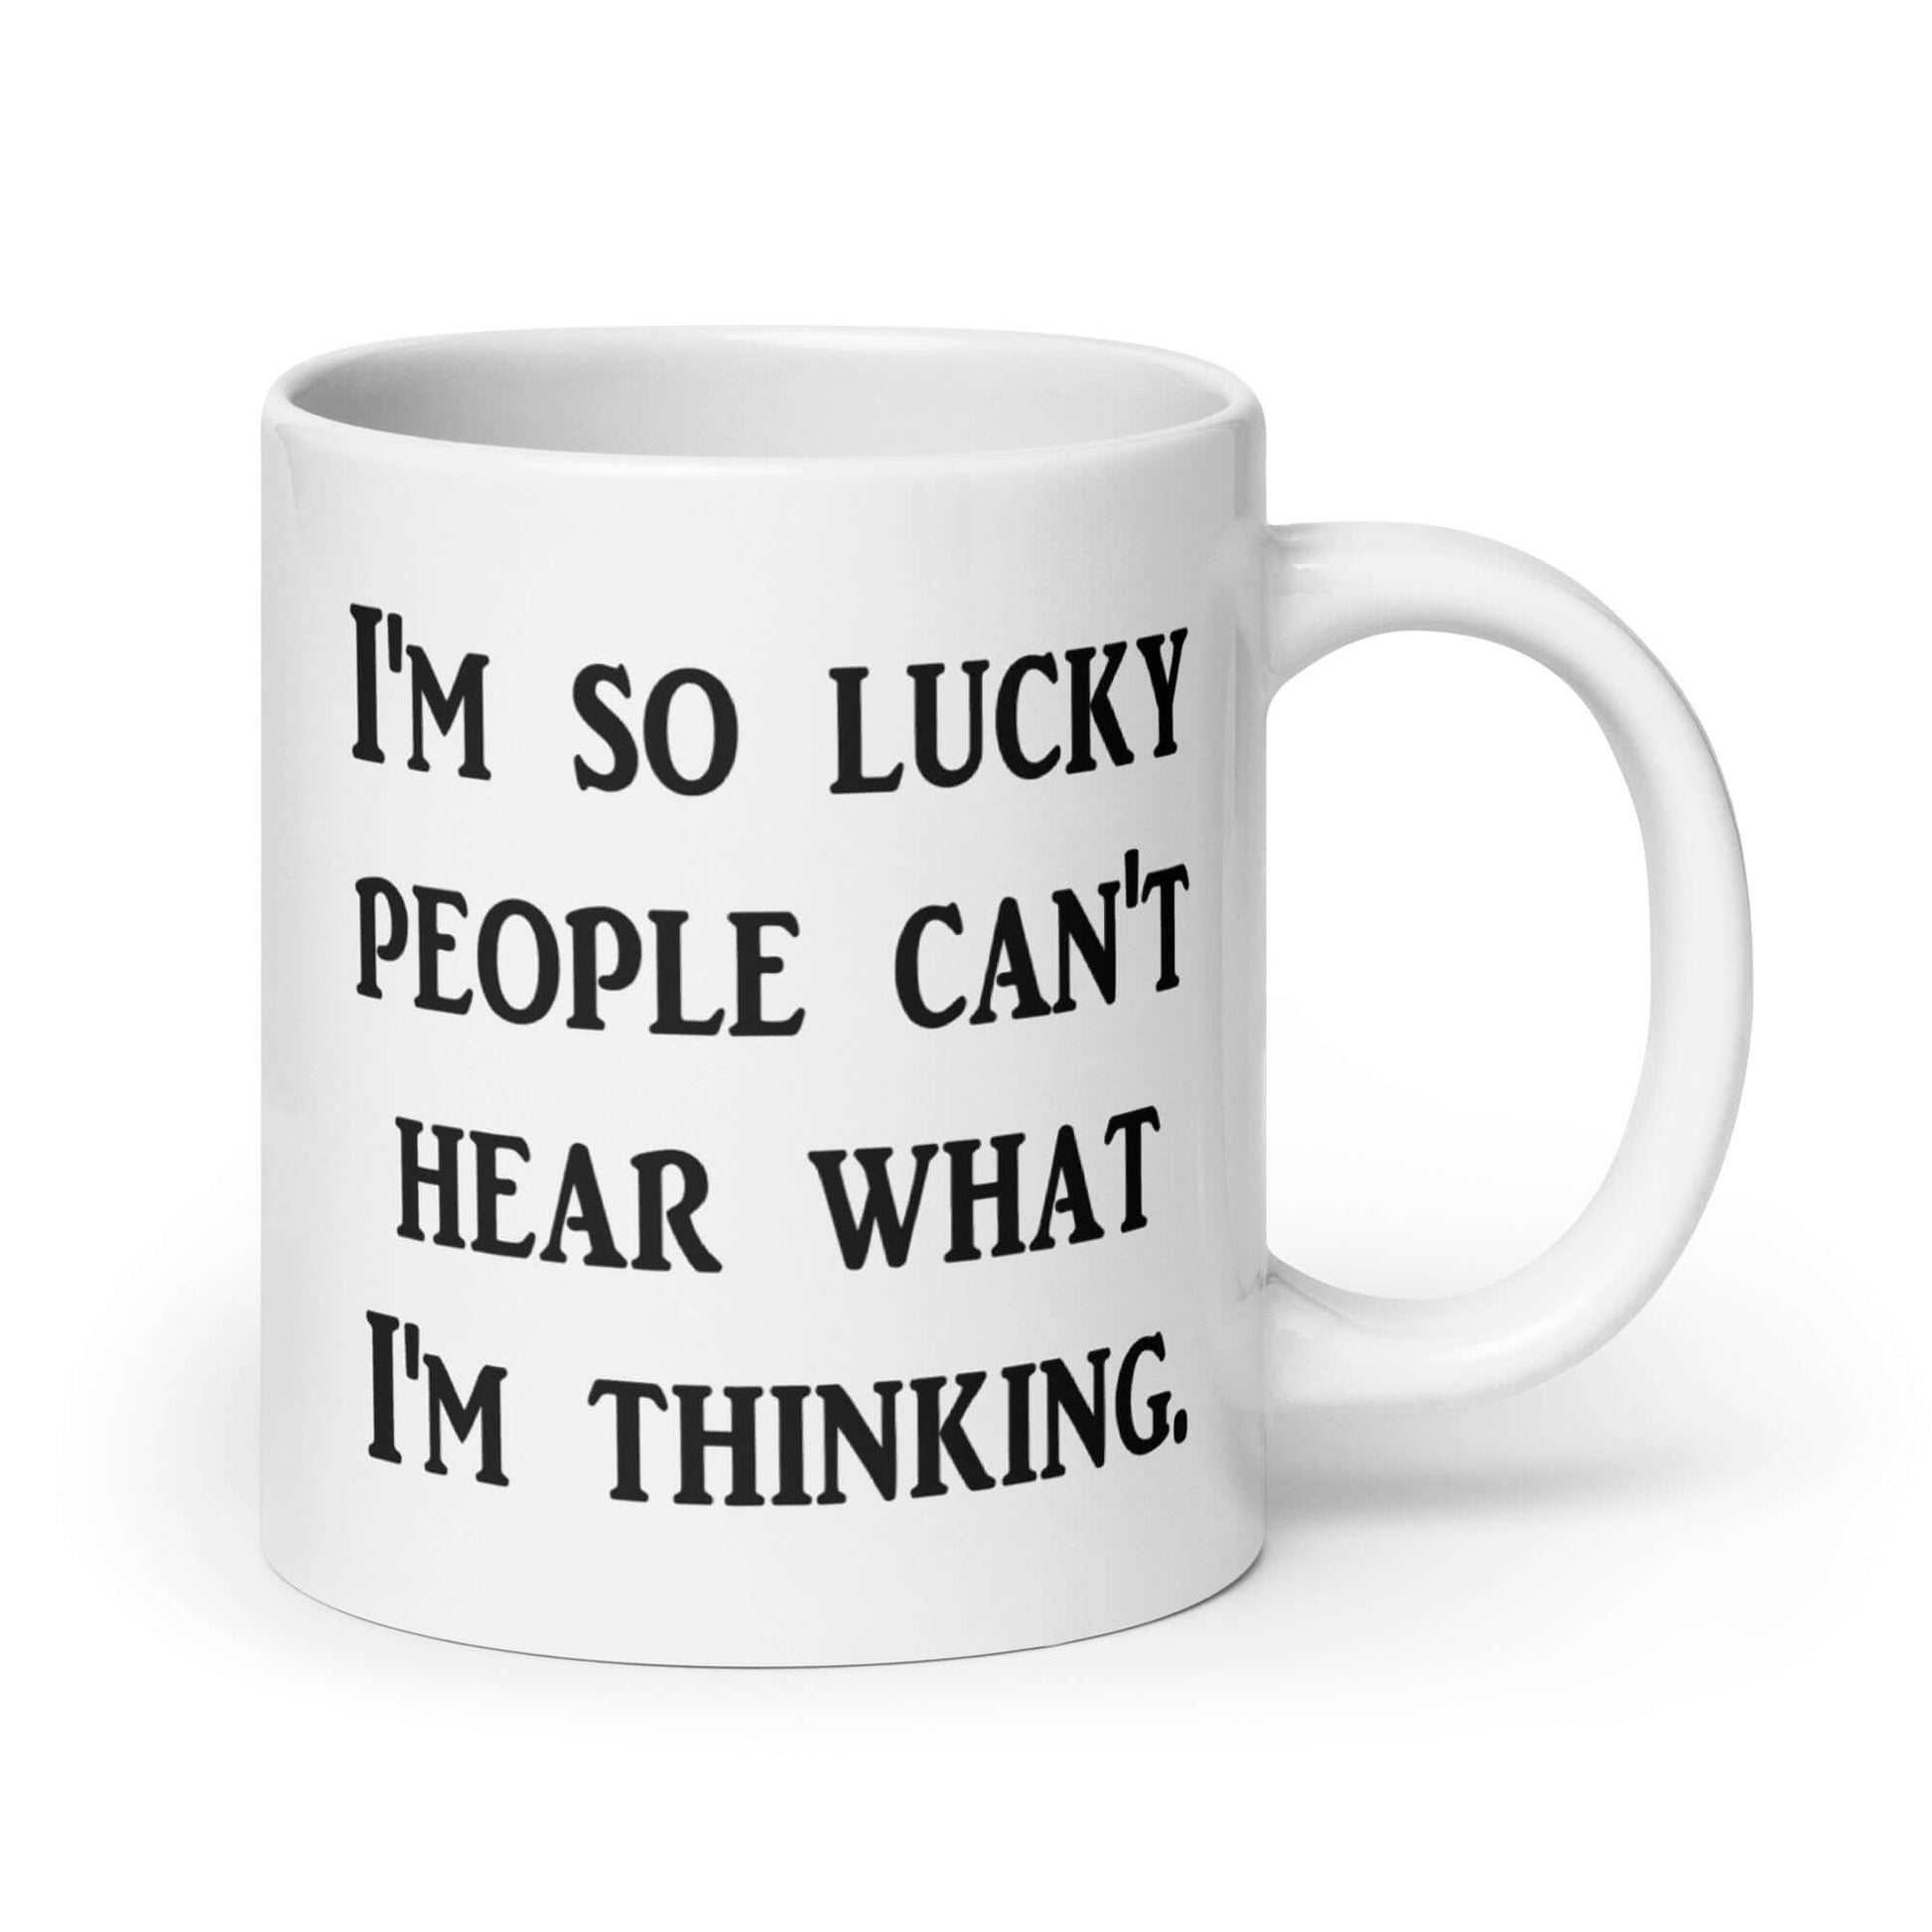 White ceramic mug that has the words I'm so lucky people can't hear what I'm thinking printed on both sides.